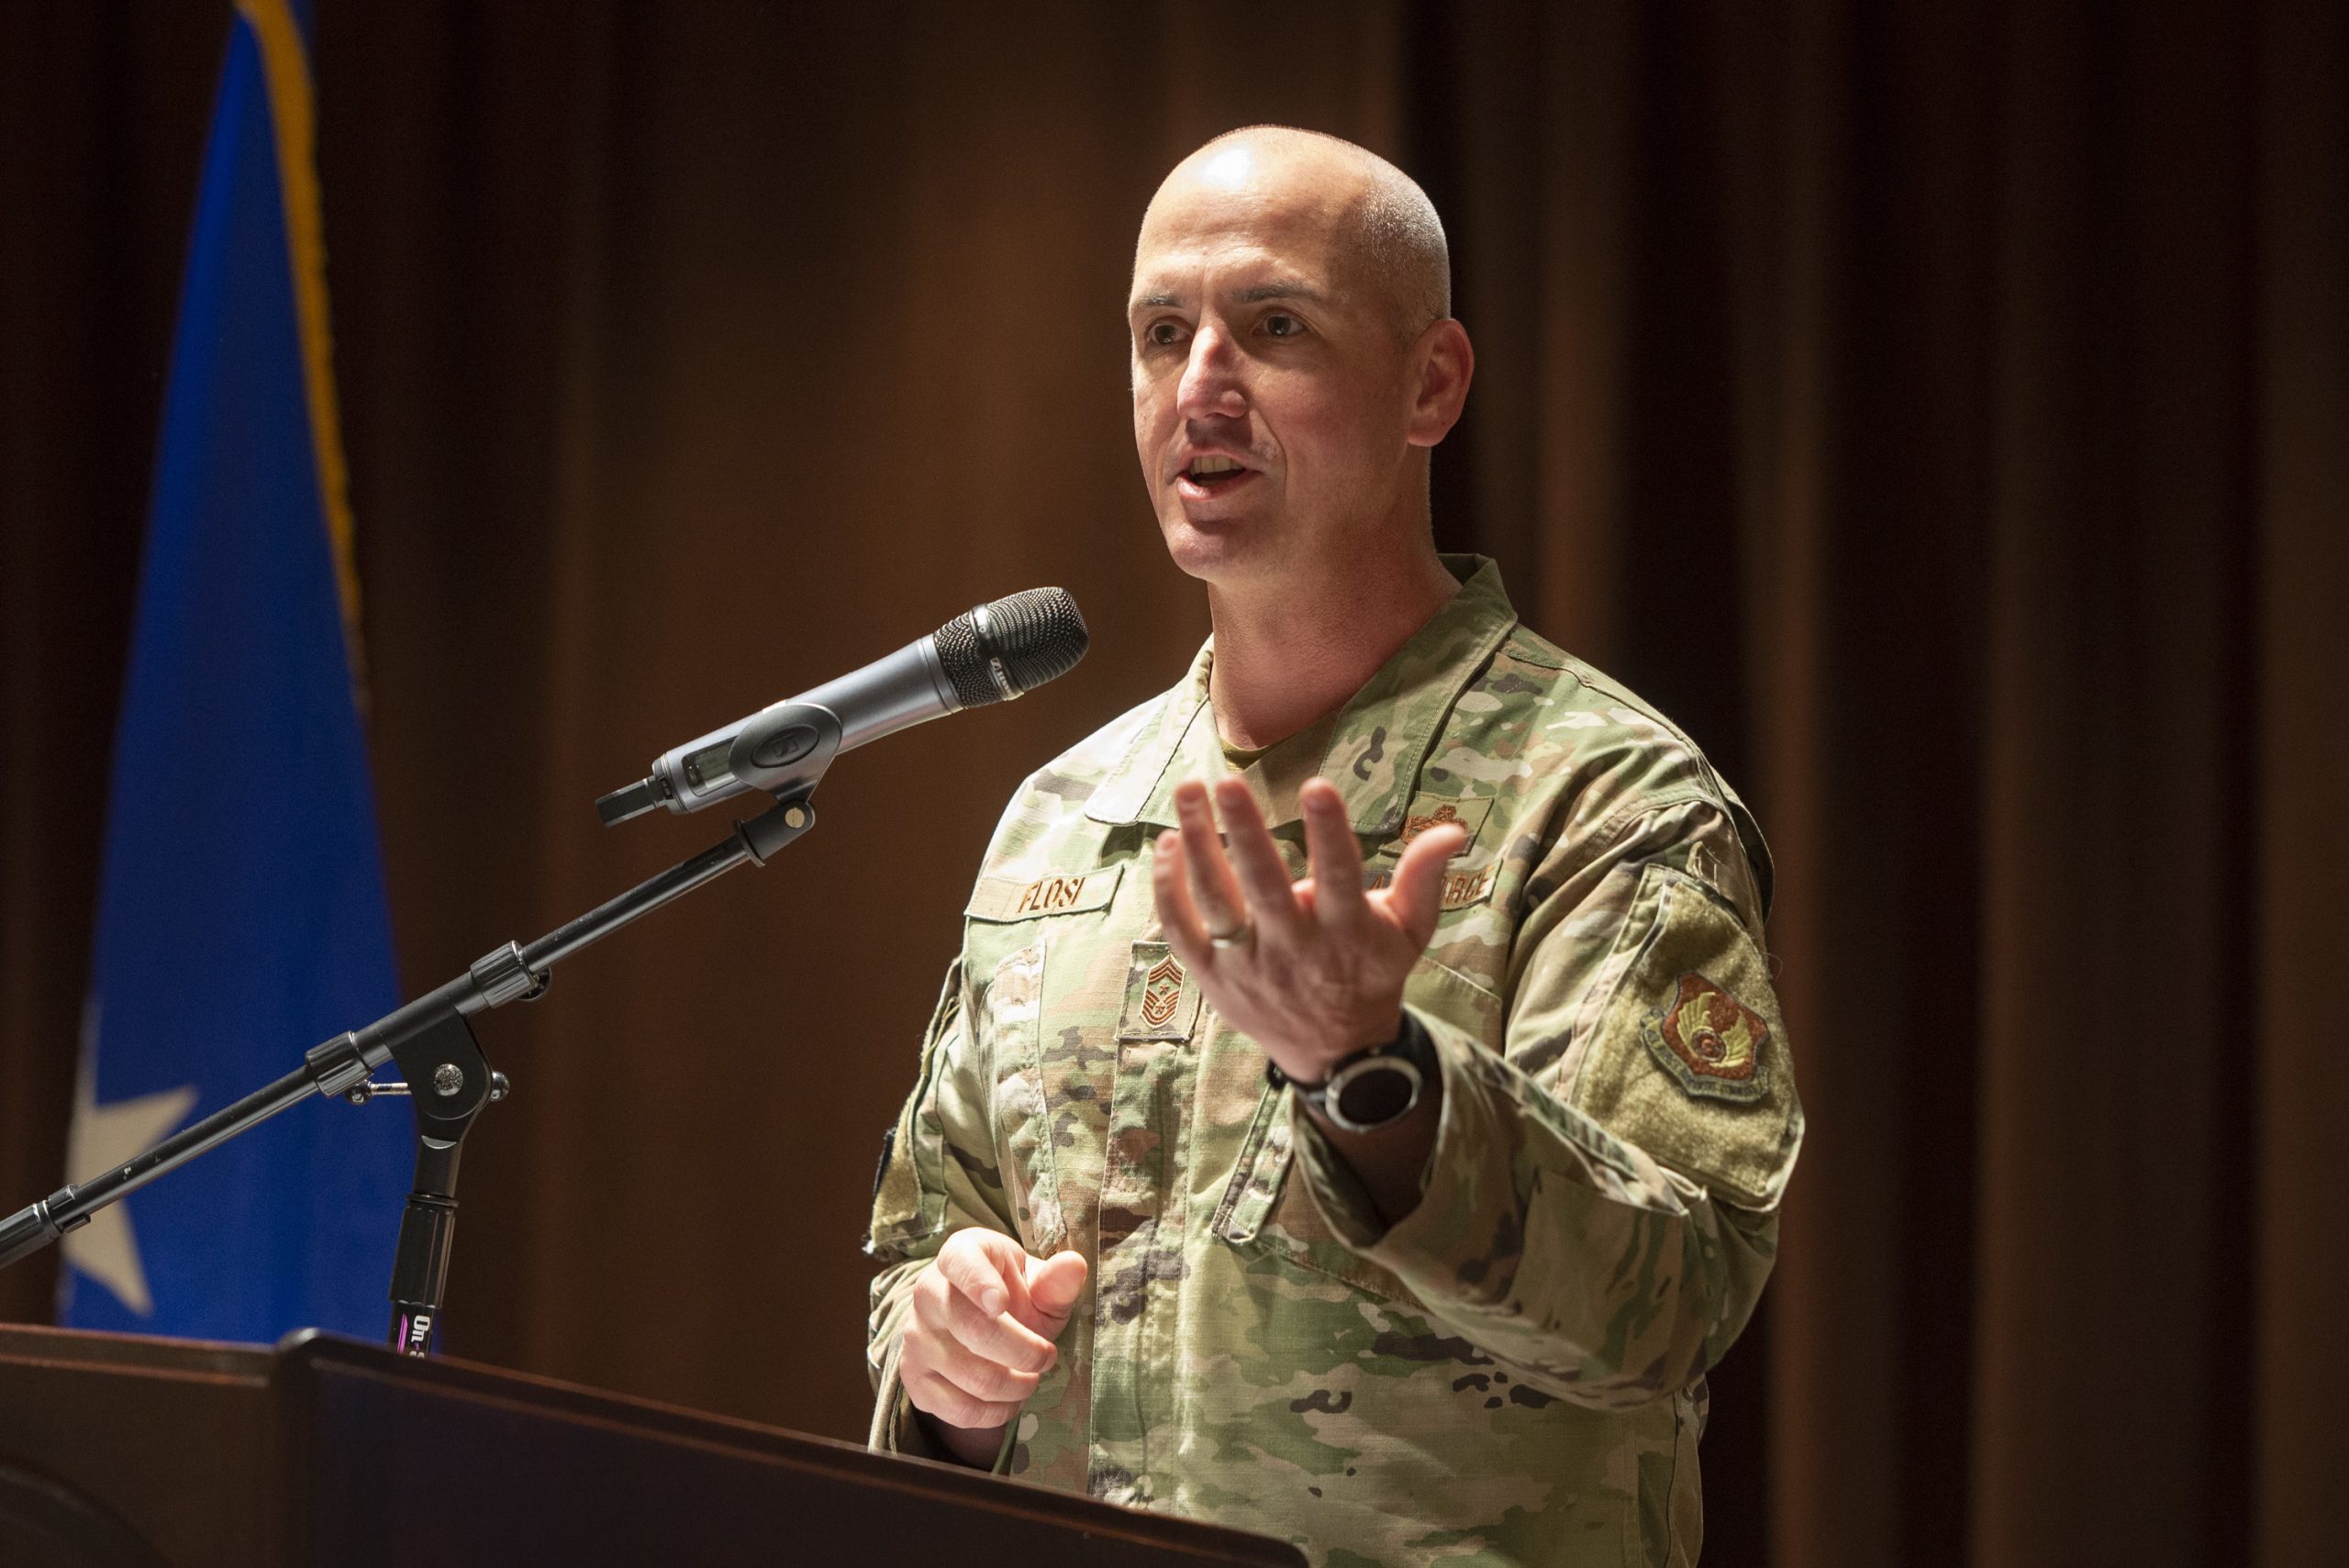 How David Flosi Went From a Broke College Student to the New CMSAF